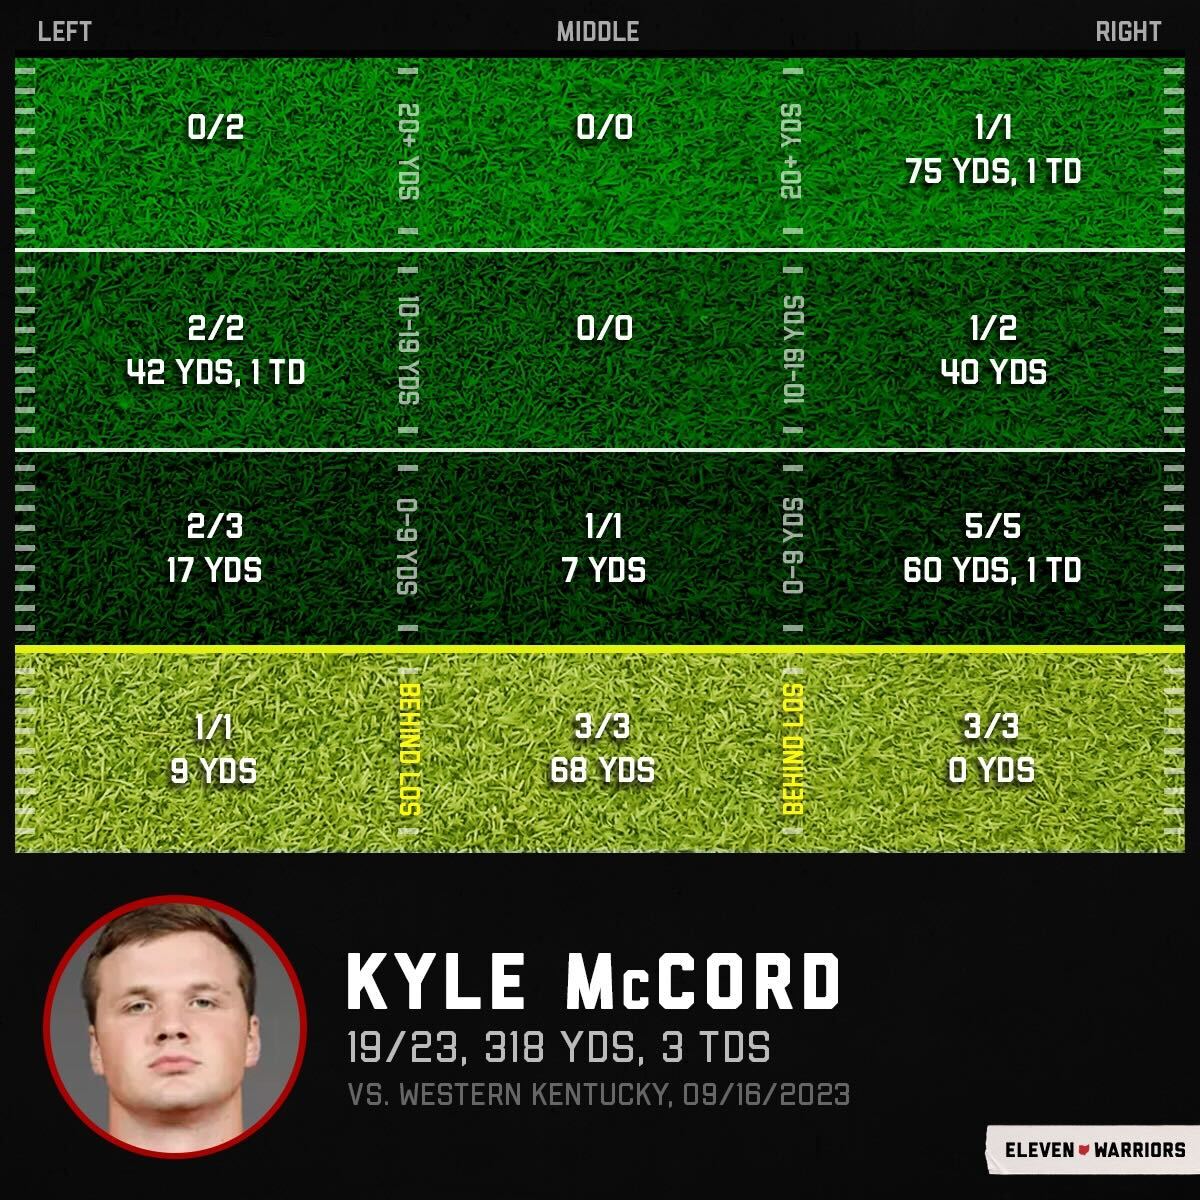 Kyle McCord's passing chart vs. Western Kentucky